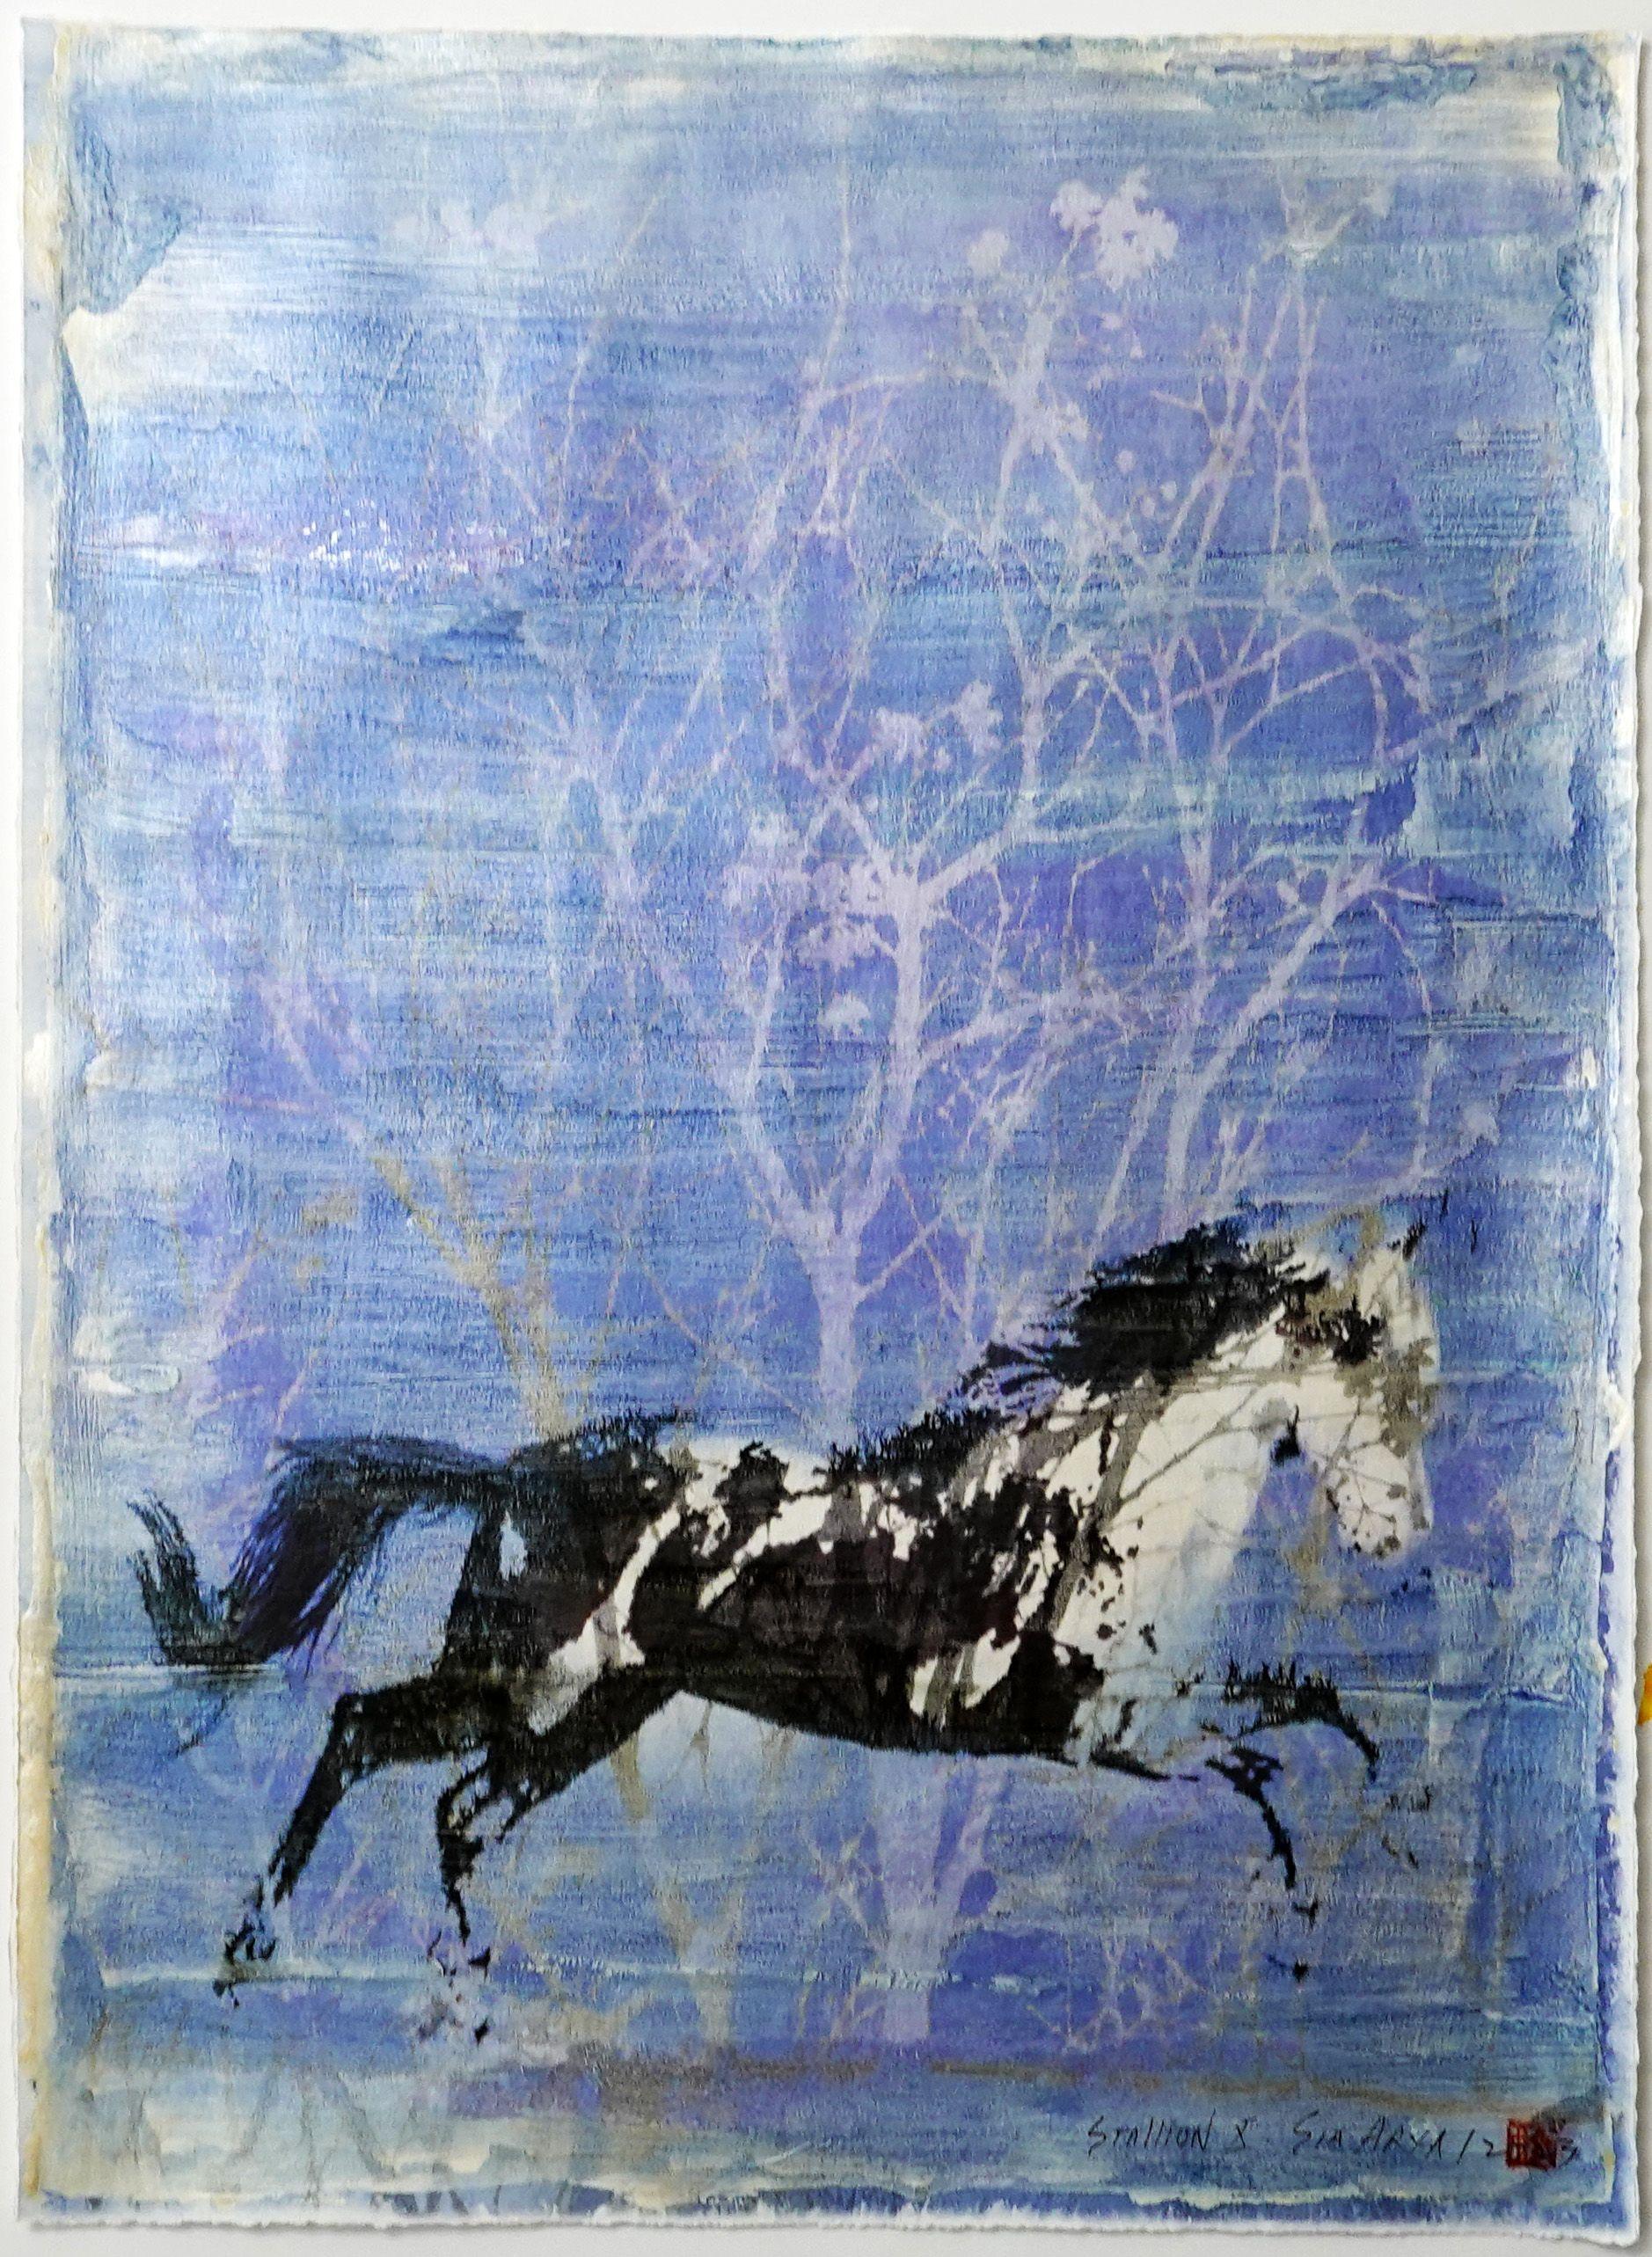 Stallion. X One of a Kind Framed Mixed Media horse, Mixed Media on Paper